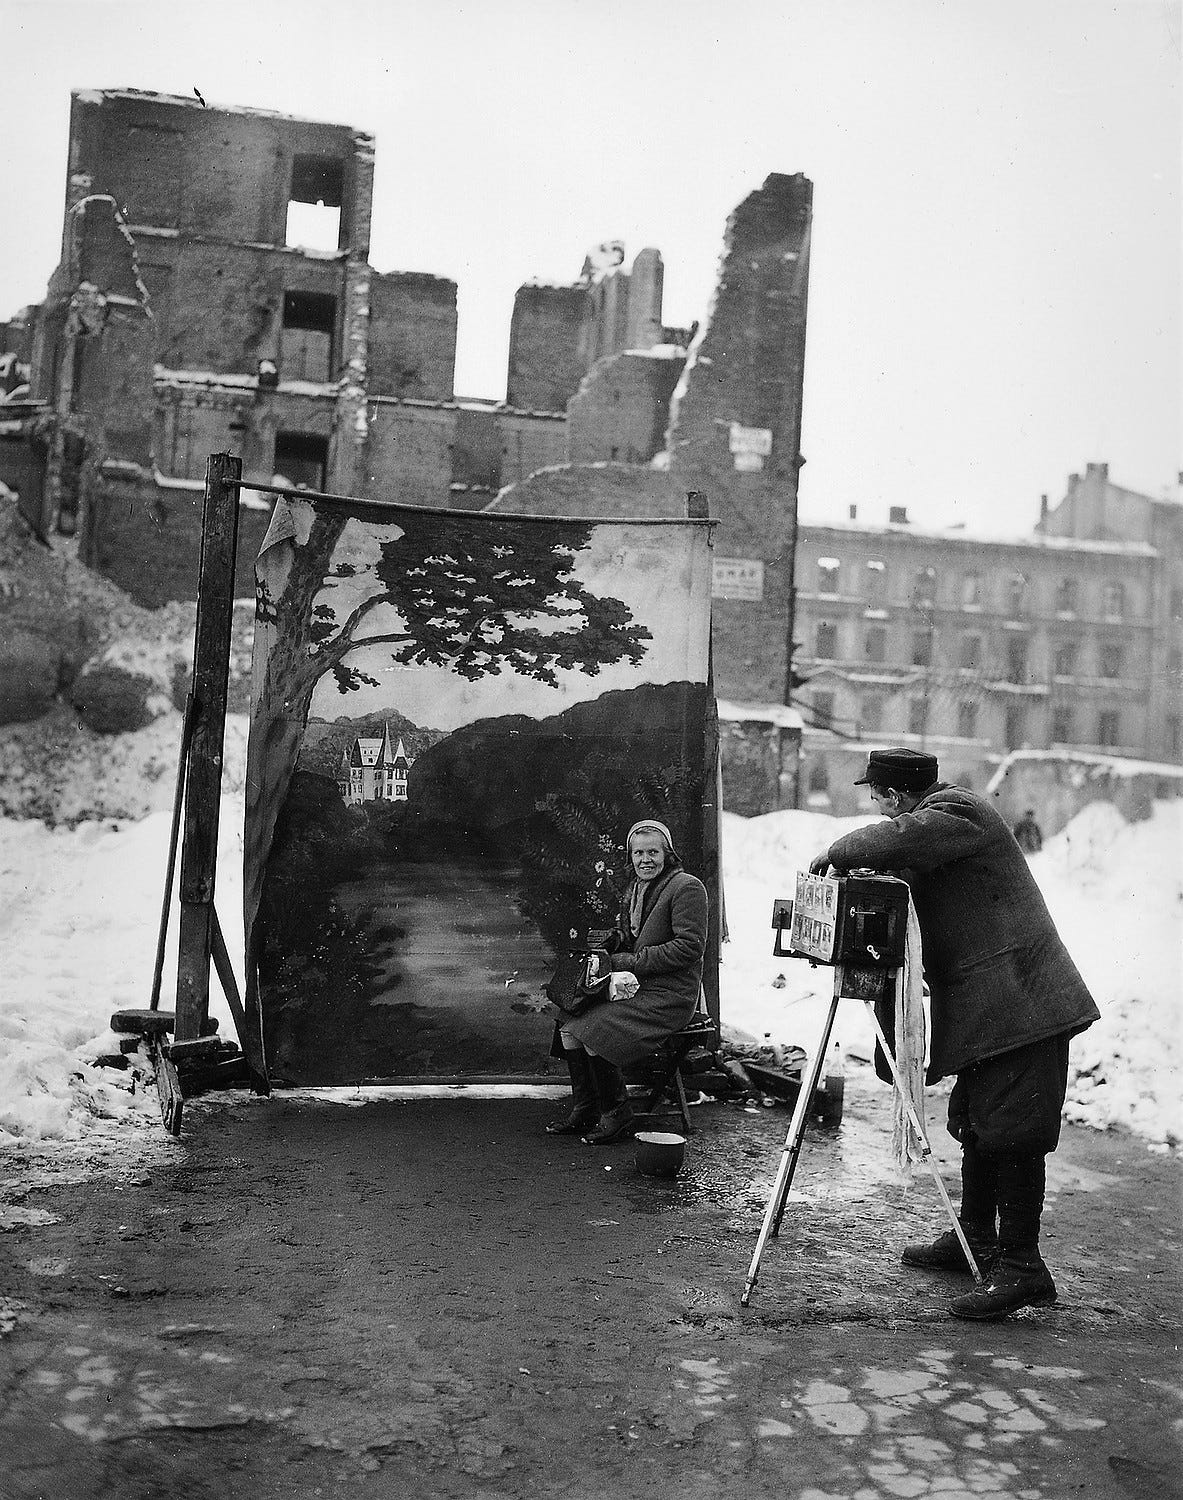 A man is taking a photograph of a seated woman. She is sitting in front of a painted backdrop featuring an idyllic rural scene. The real backdrop behind that is a bombed out cityscape.